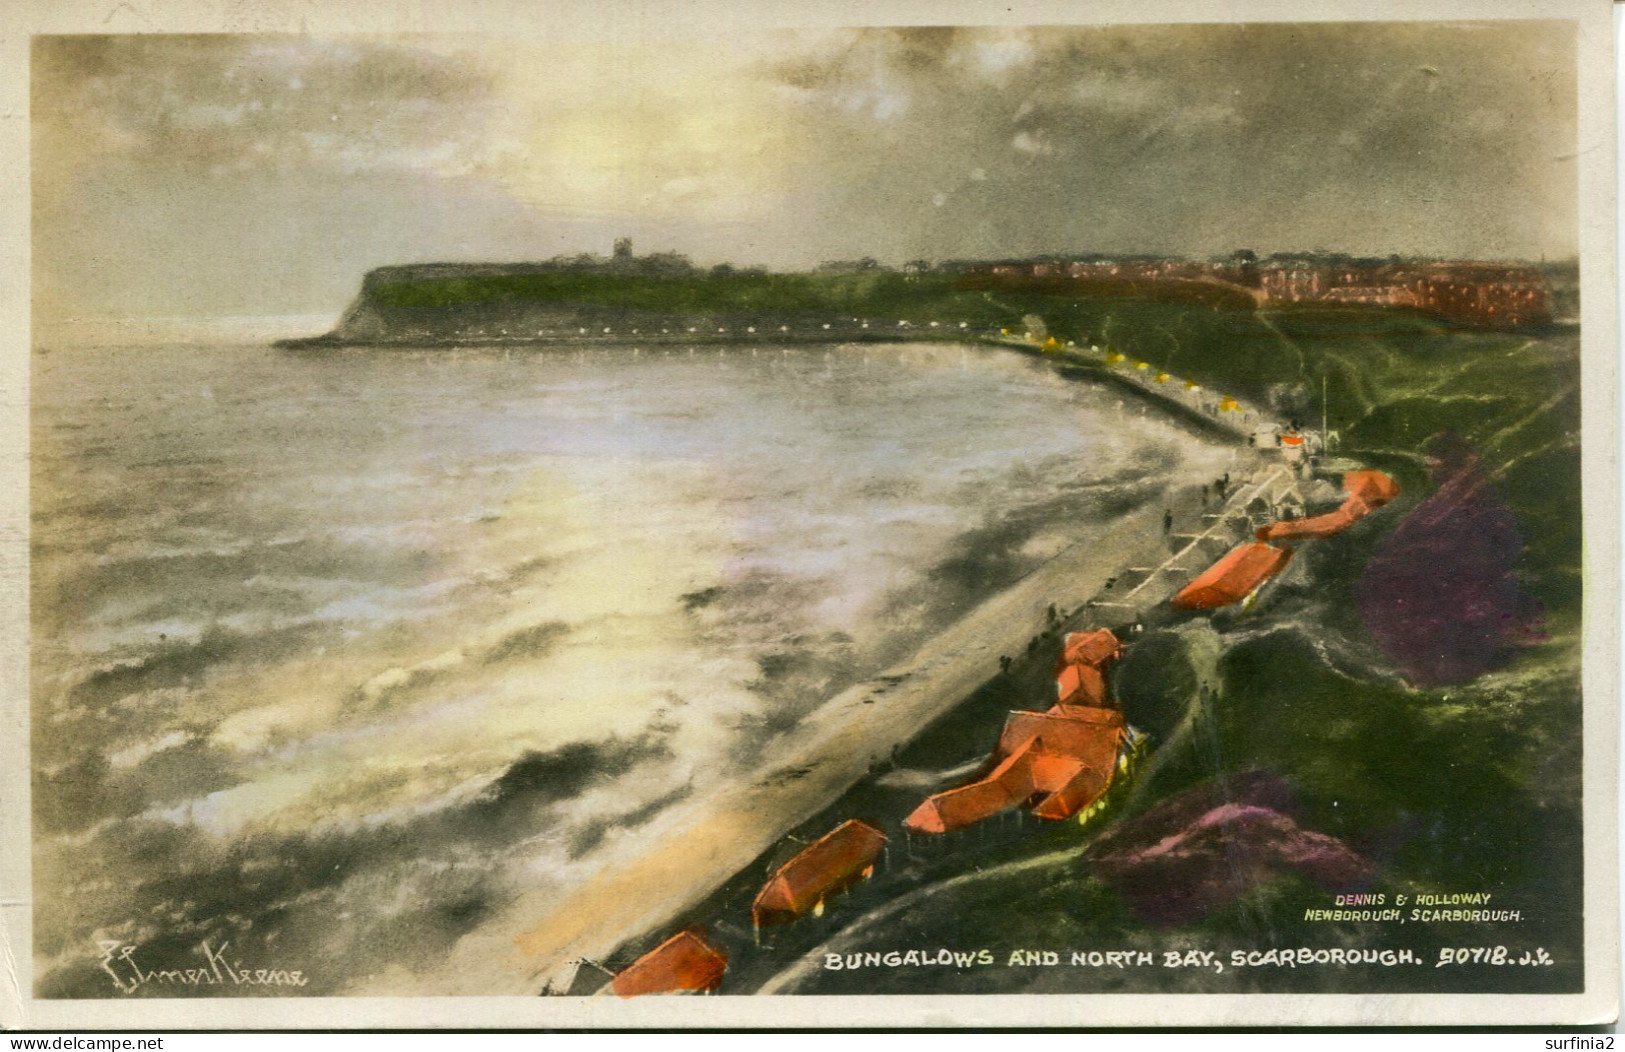 YORKS - SCARBOROUGH - BUNGALOWS AND NORTH BAY - ELMER KEENE Y4031 - Scarborough